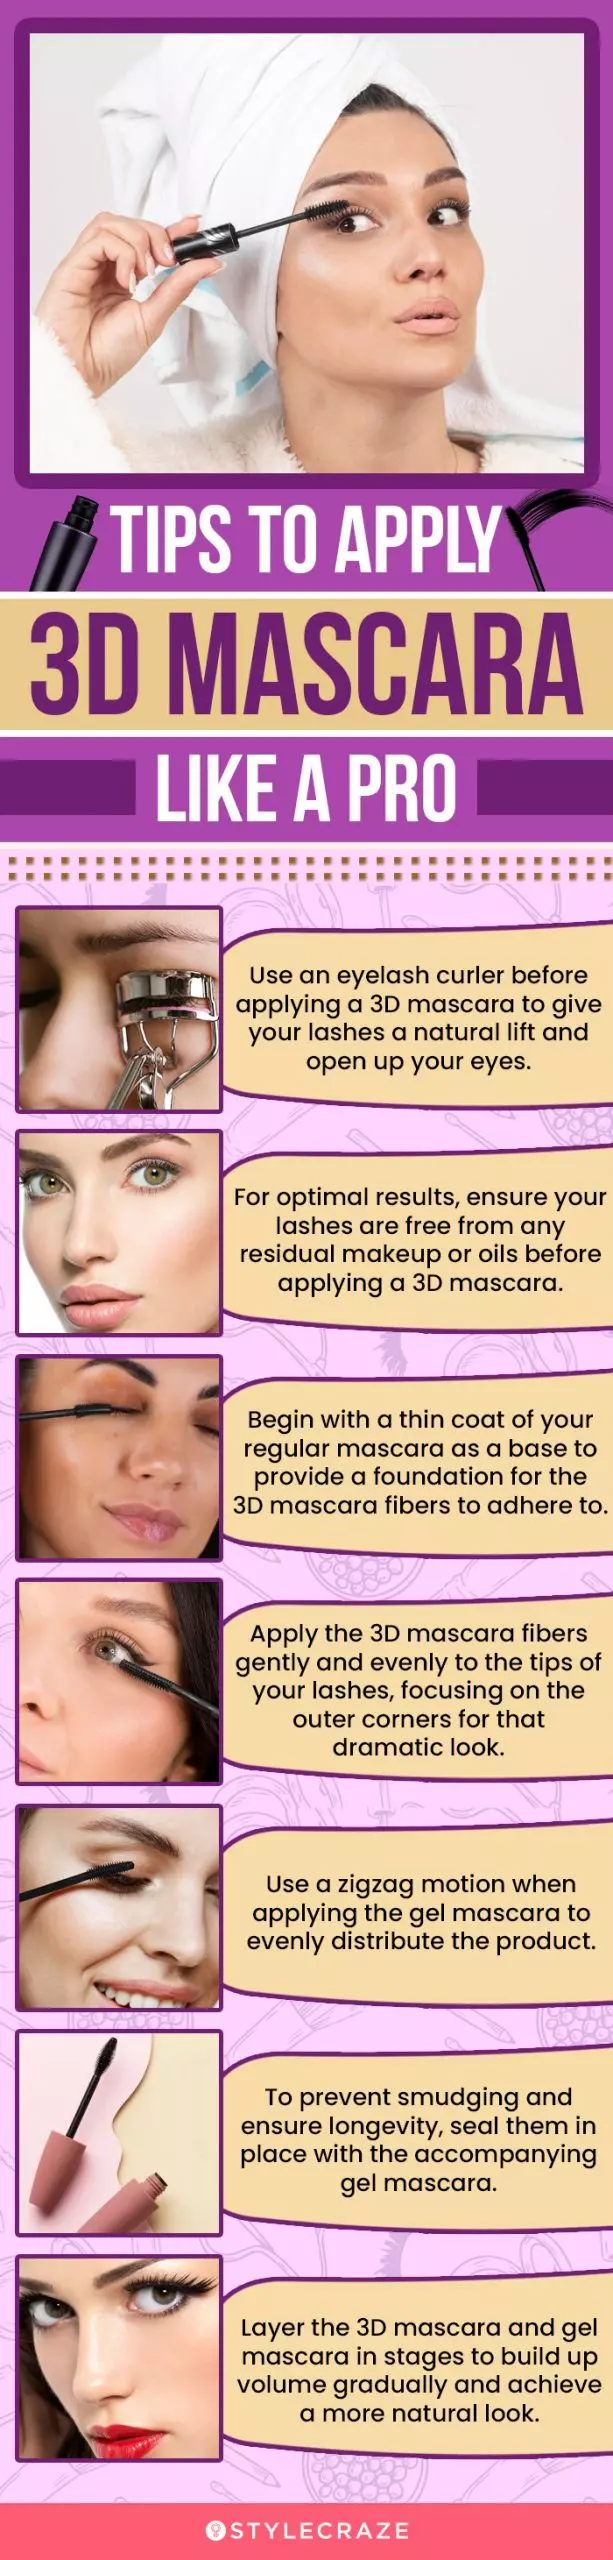 Tips To Apply 3D Mascara Like A Pro (infographic)